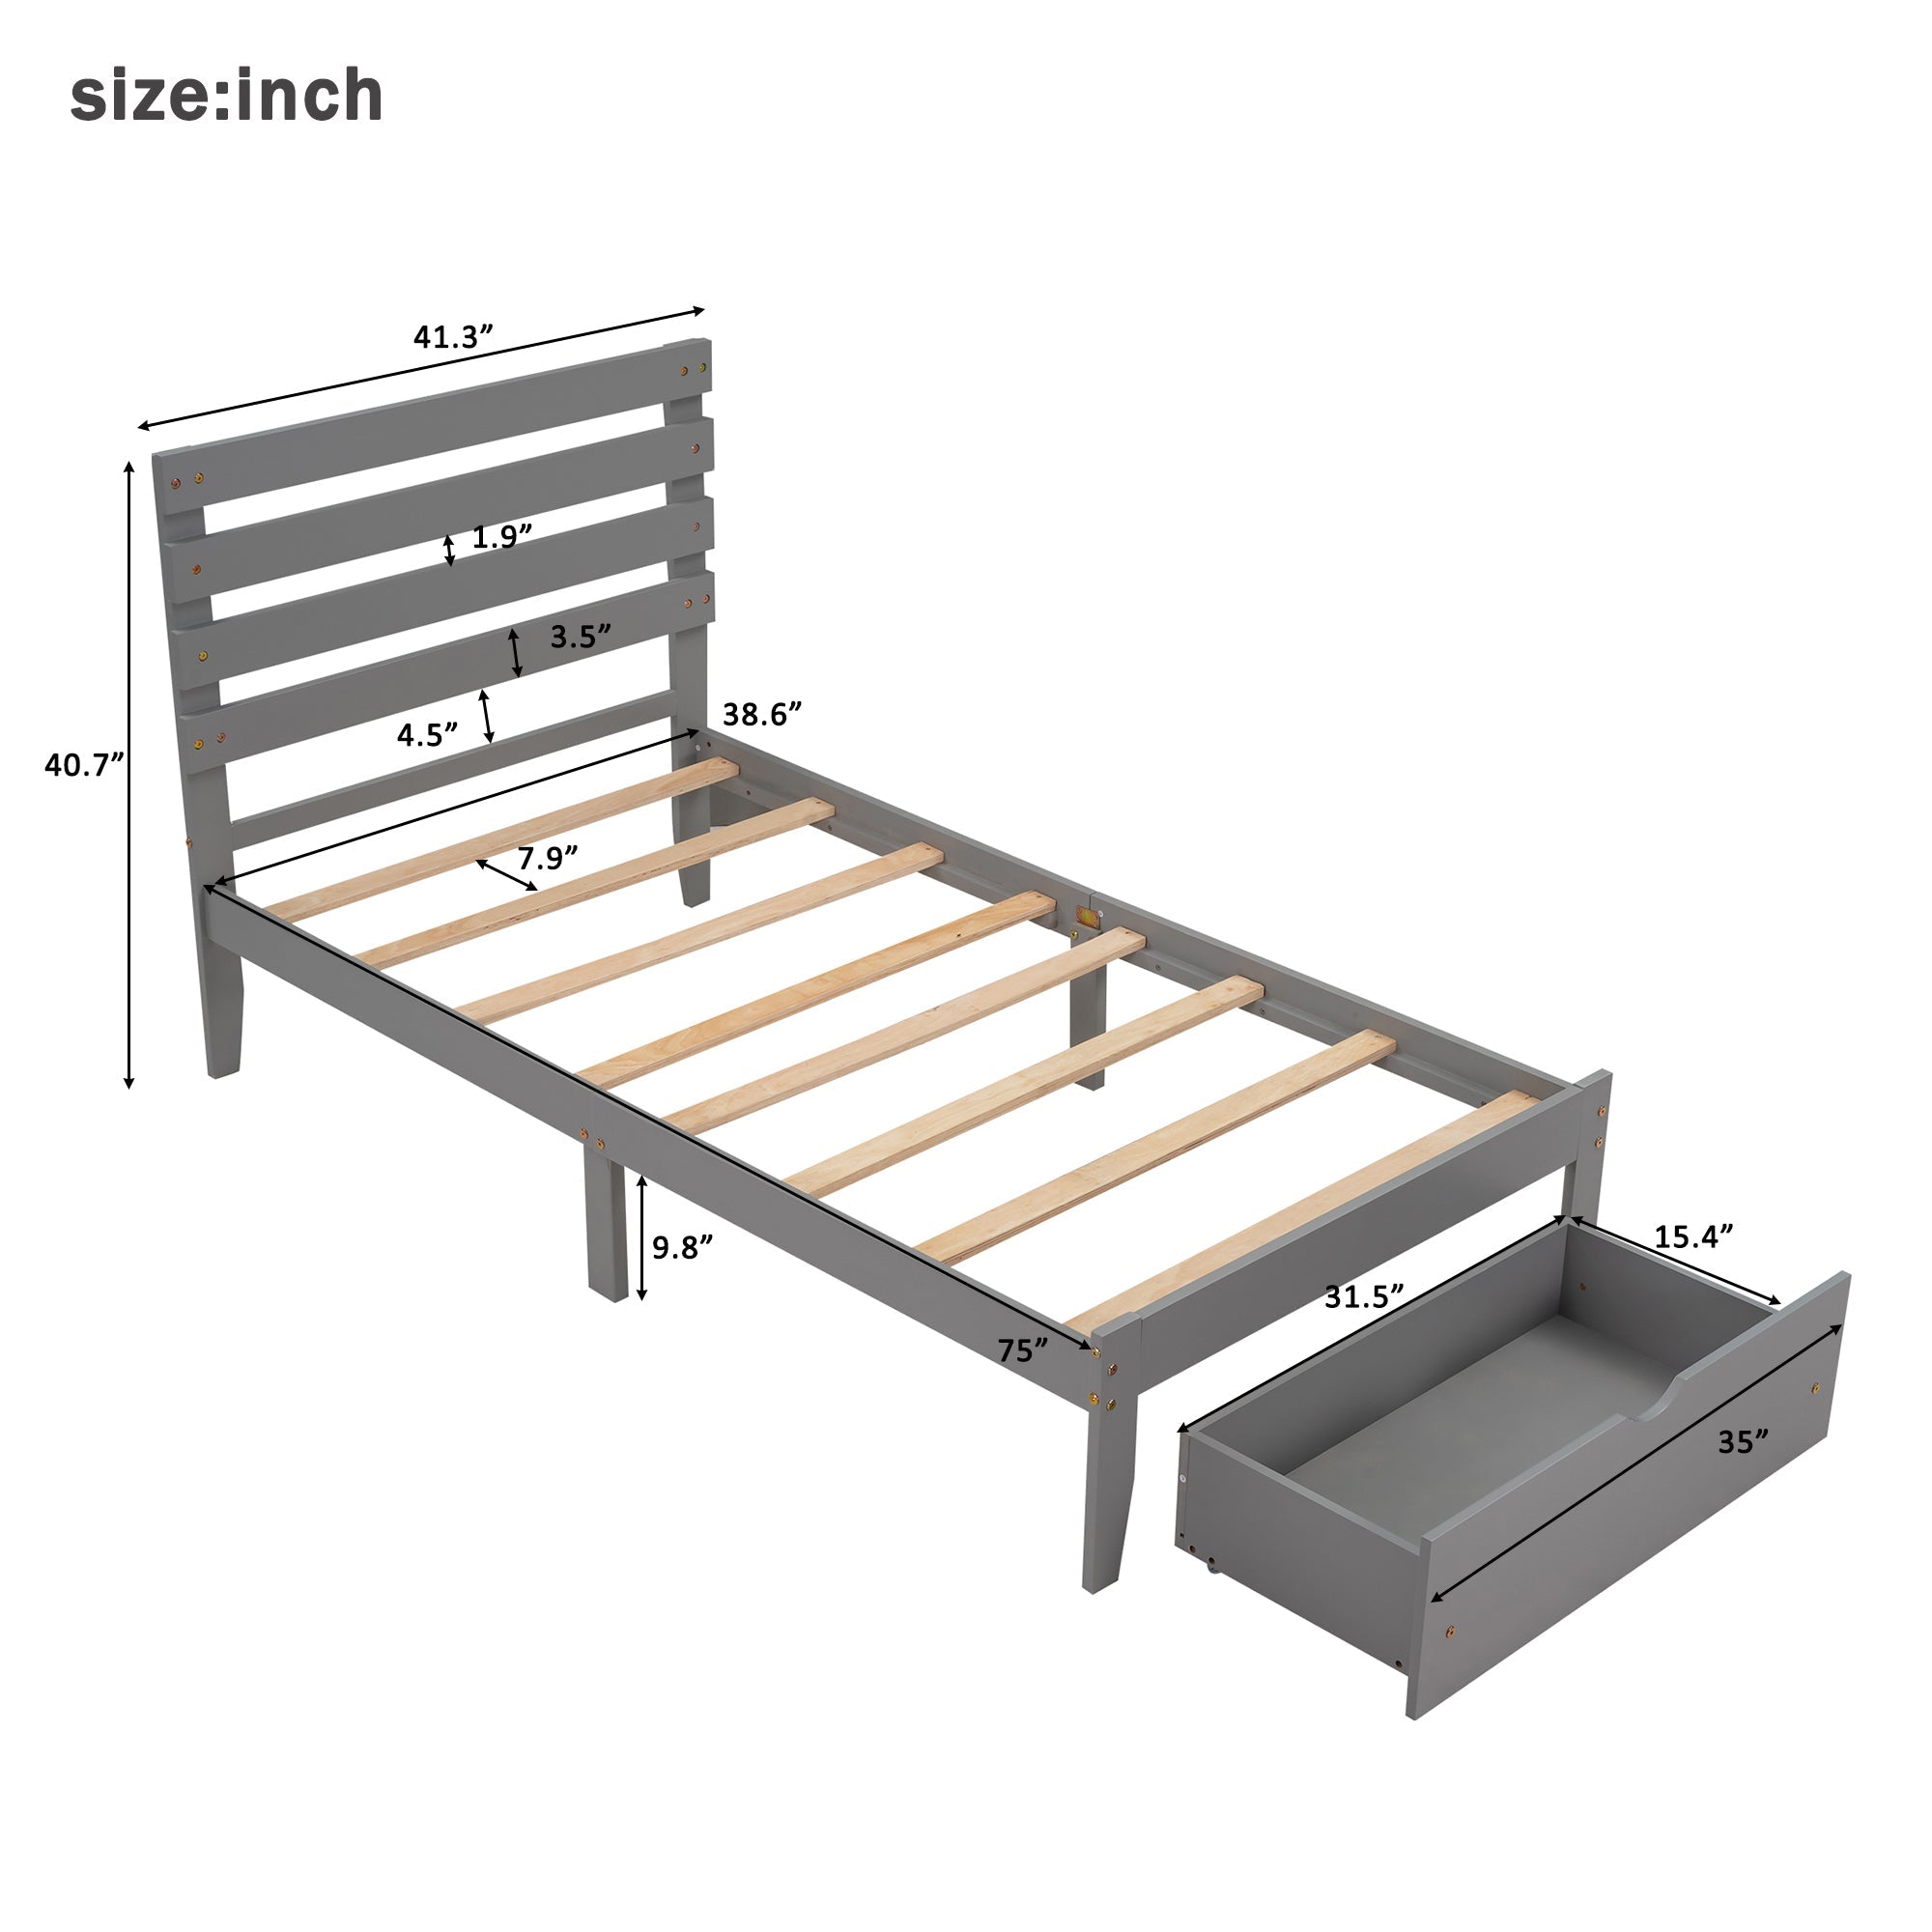 Euroco Twin Wooden Platform Bed with Drawer for Kids, Gray